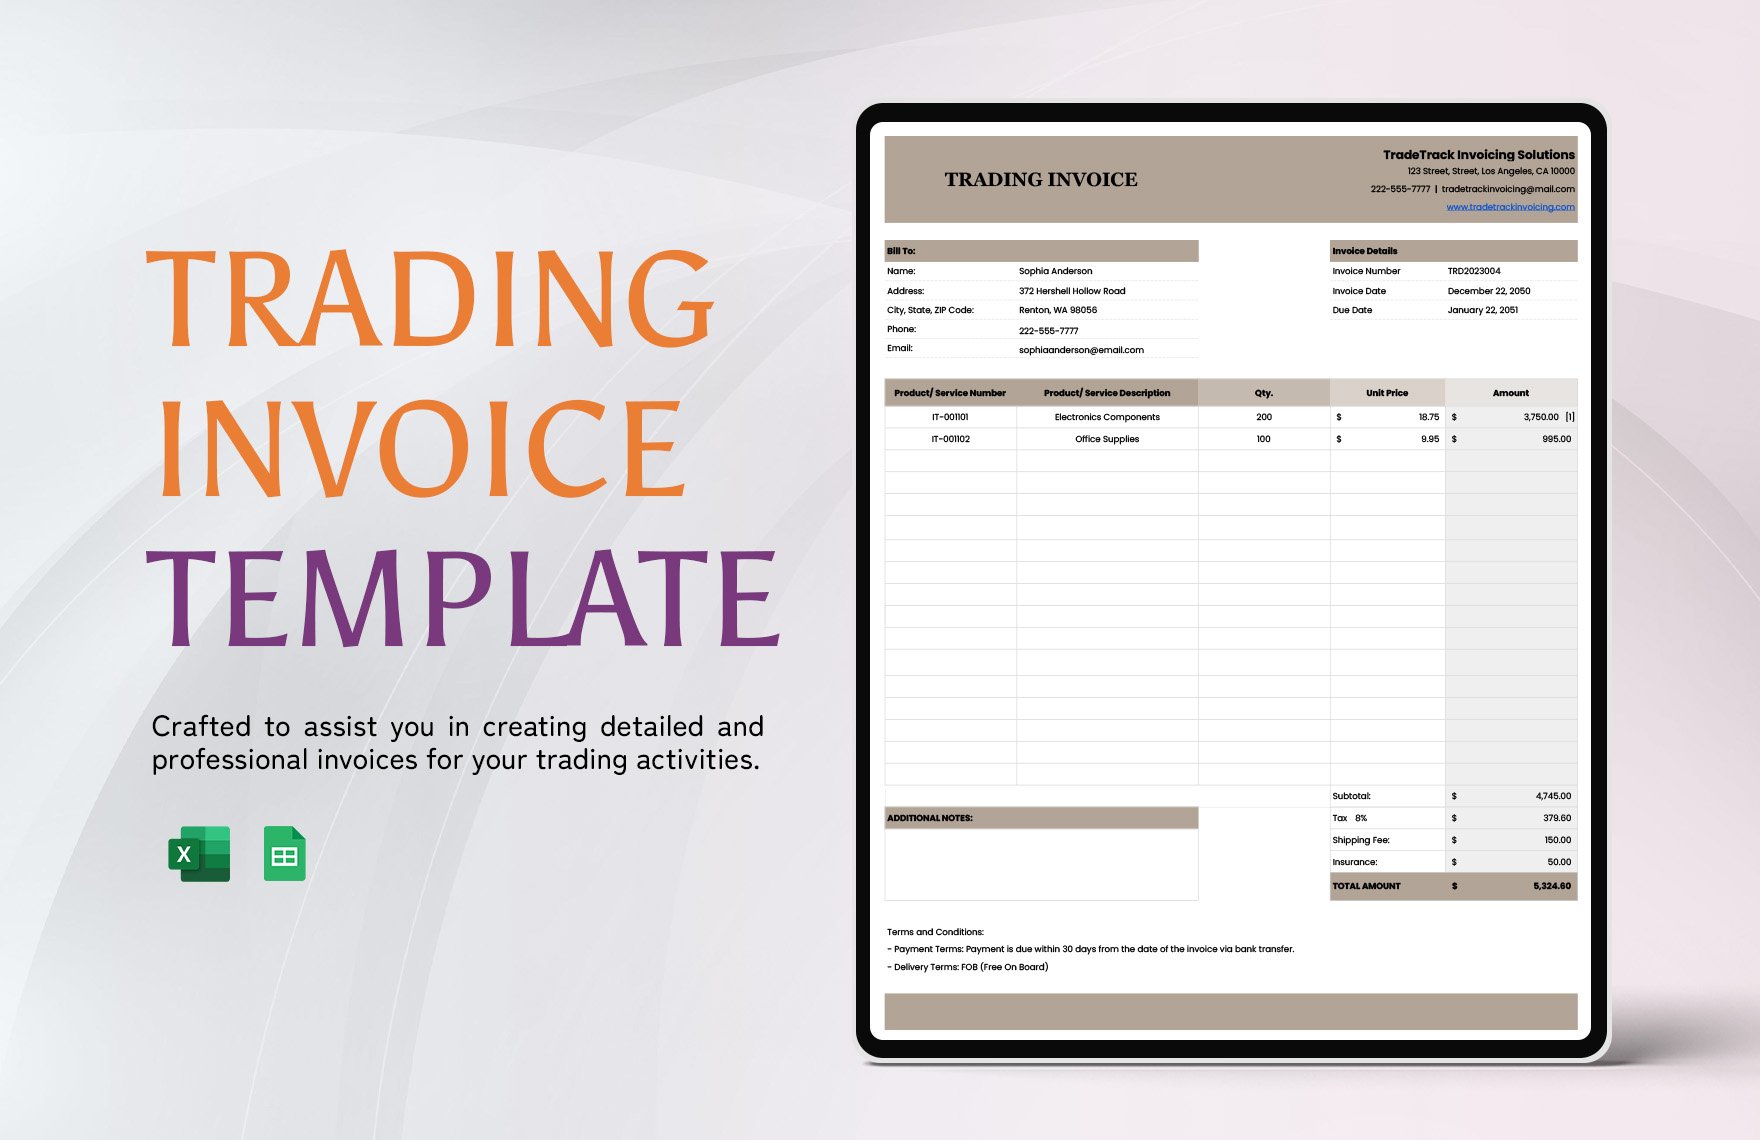 Trading Invoice Template